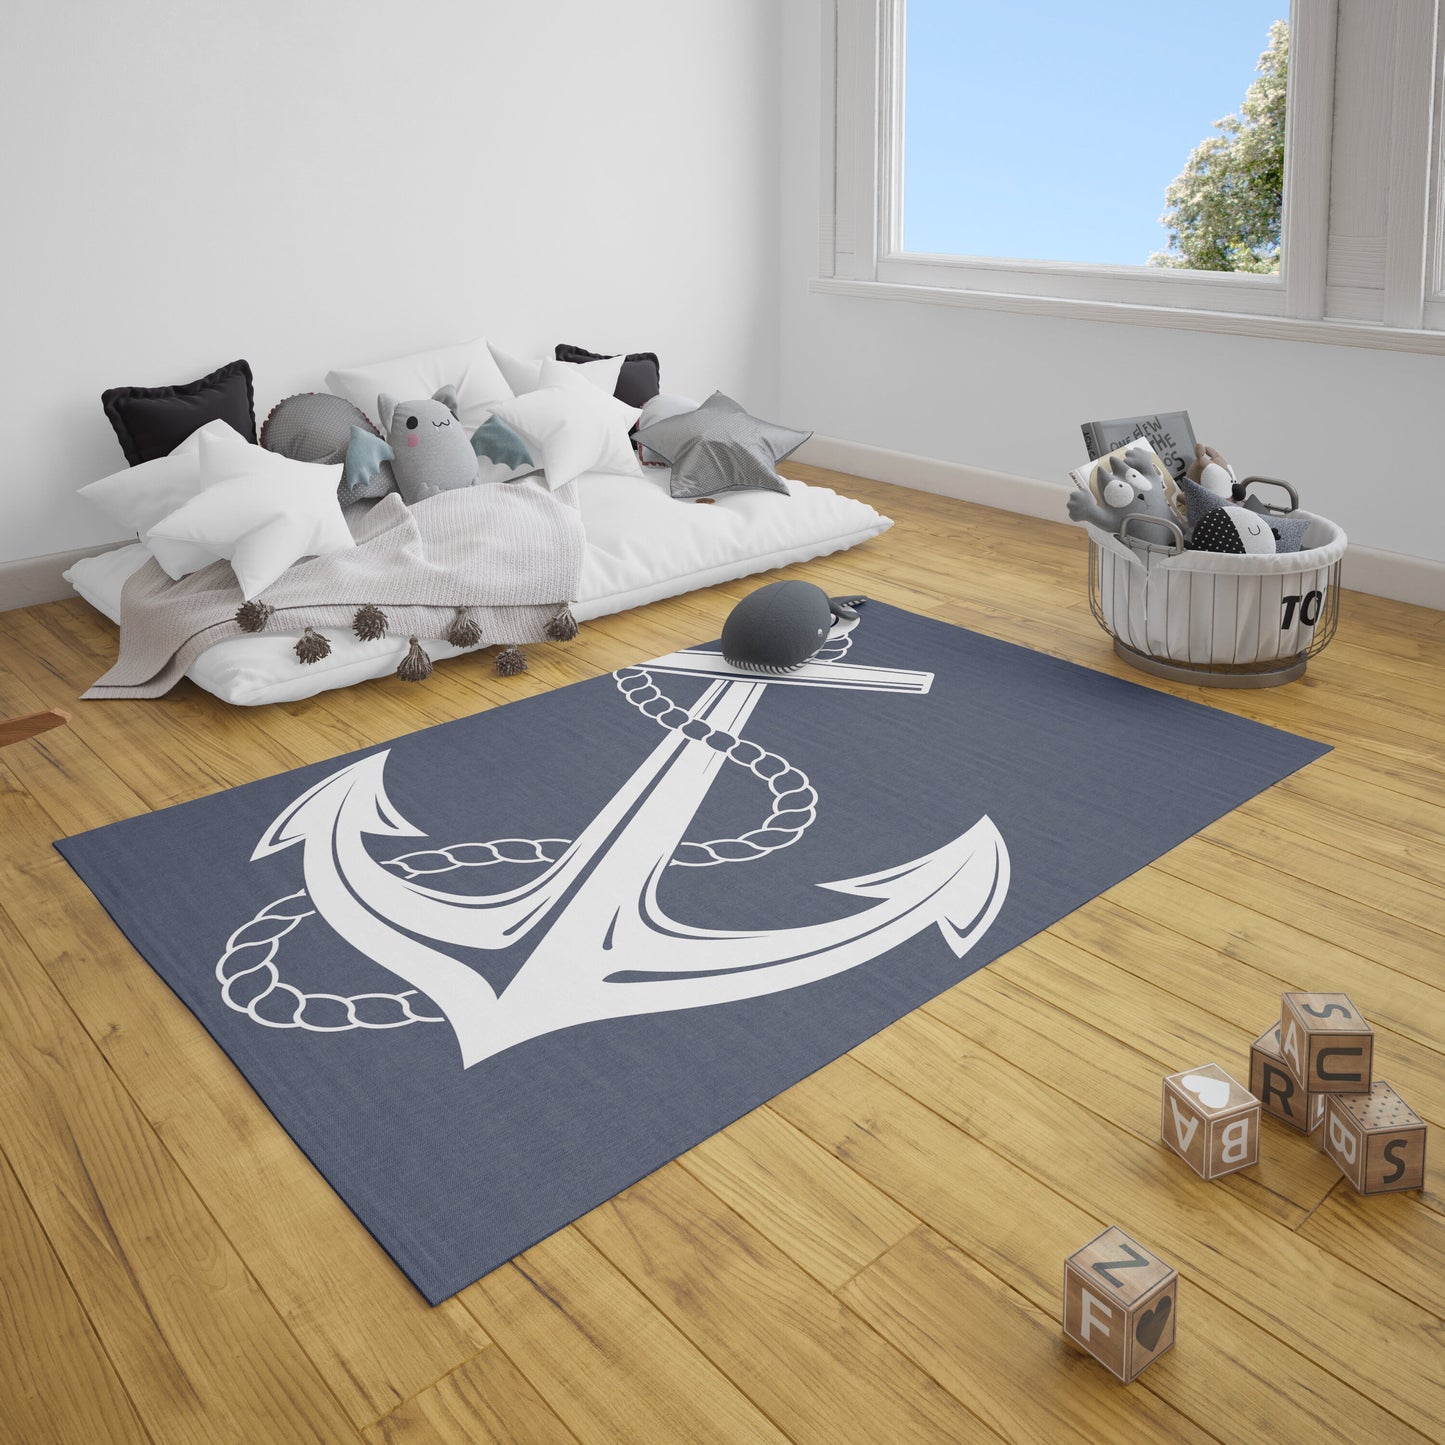 Anchor Rug nautical Rug boaters Rugs navy white Floor Rug beachy Rugs 3x5 4x6 5x7 5x8 8x10 Large rug beach decor anchors rope boating